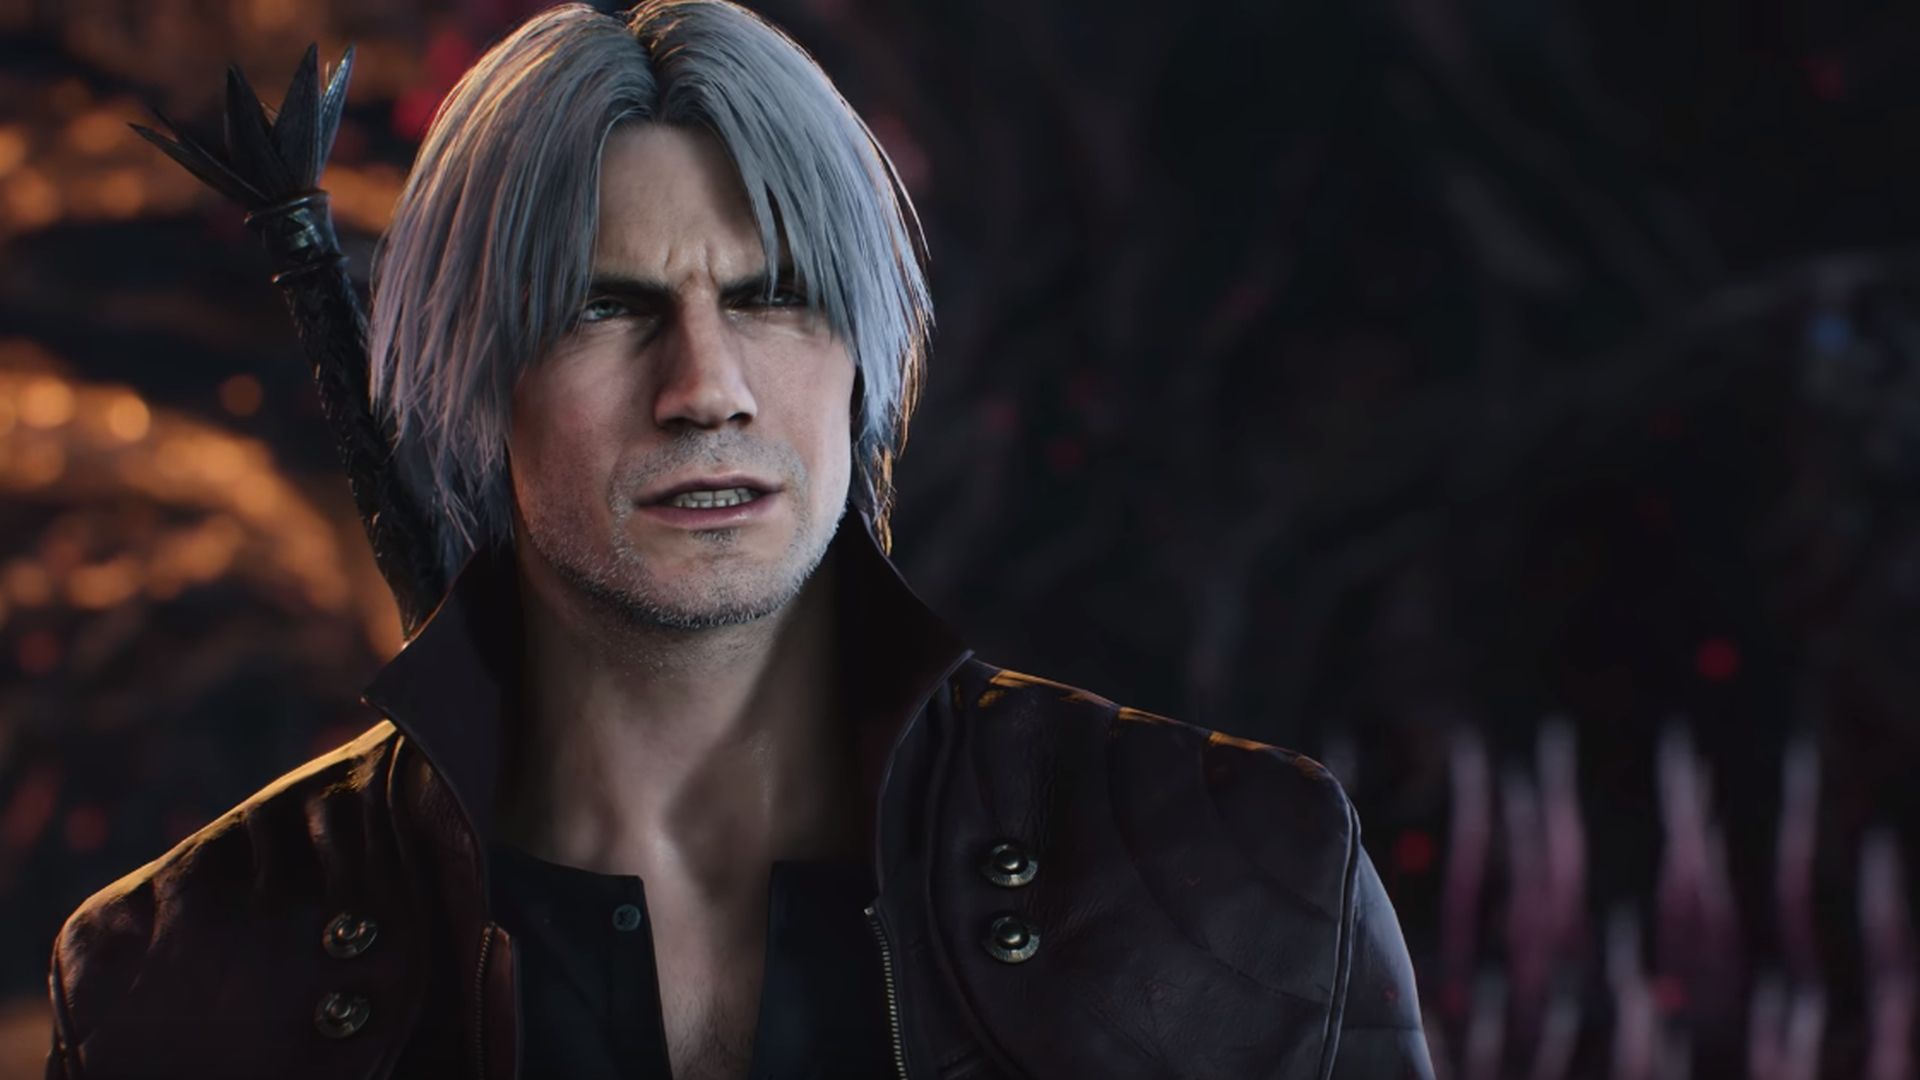 Devil May Cry 5 theme gets new vocal tracks after allegations